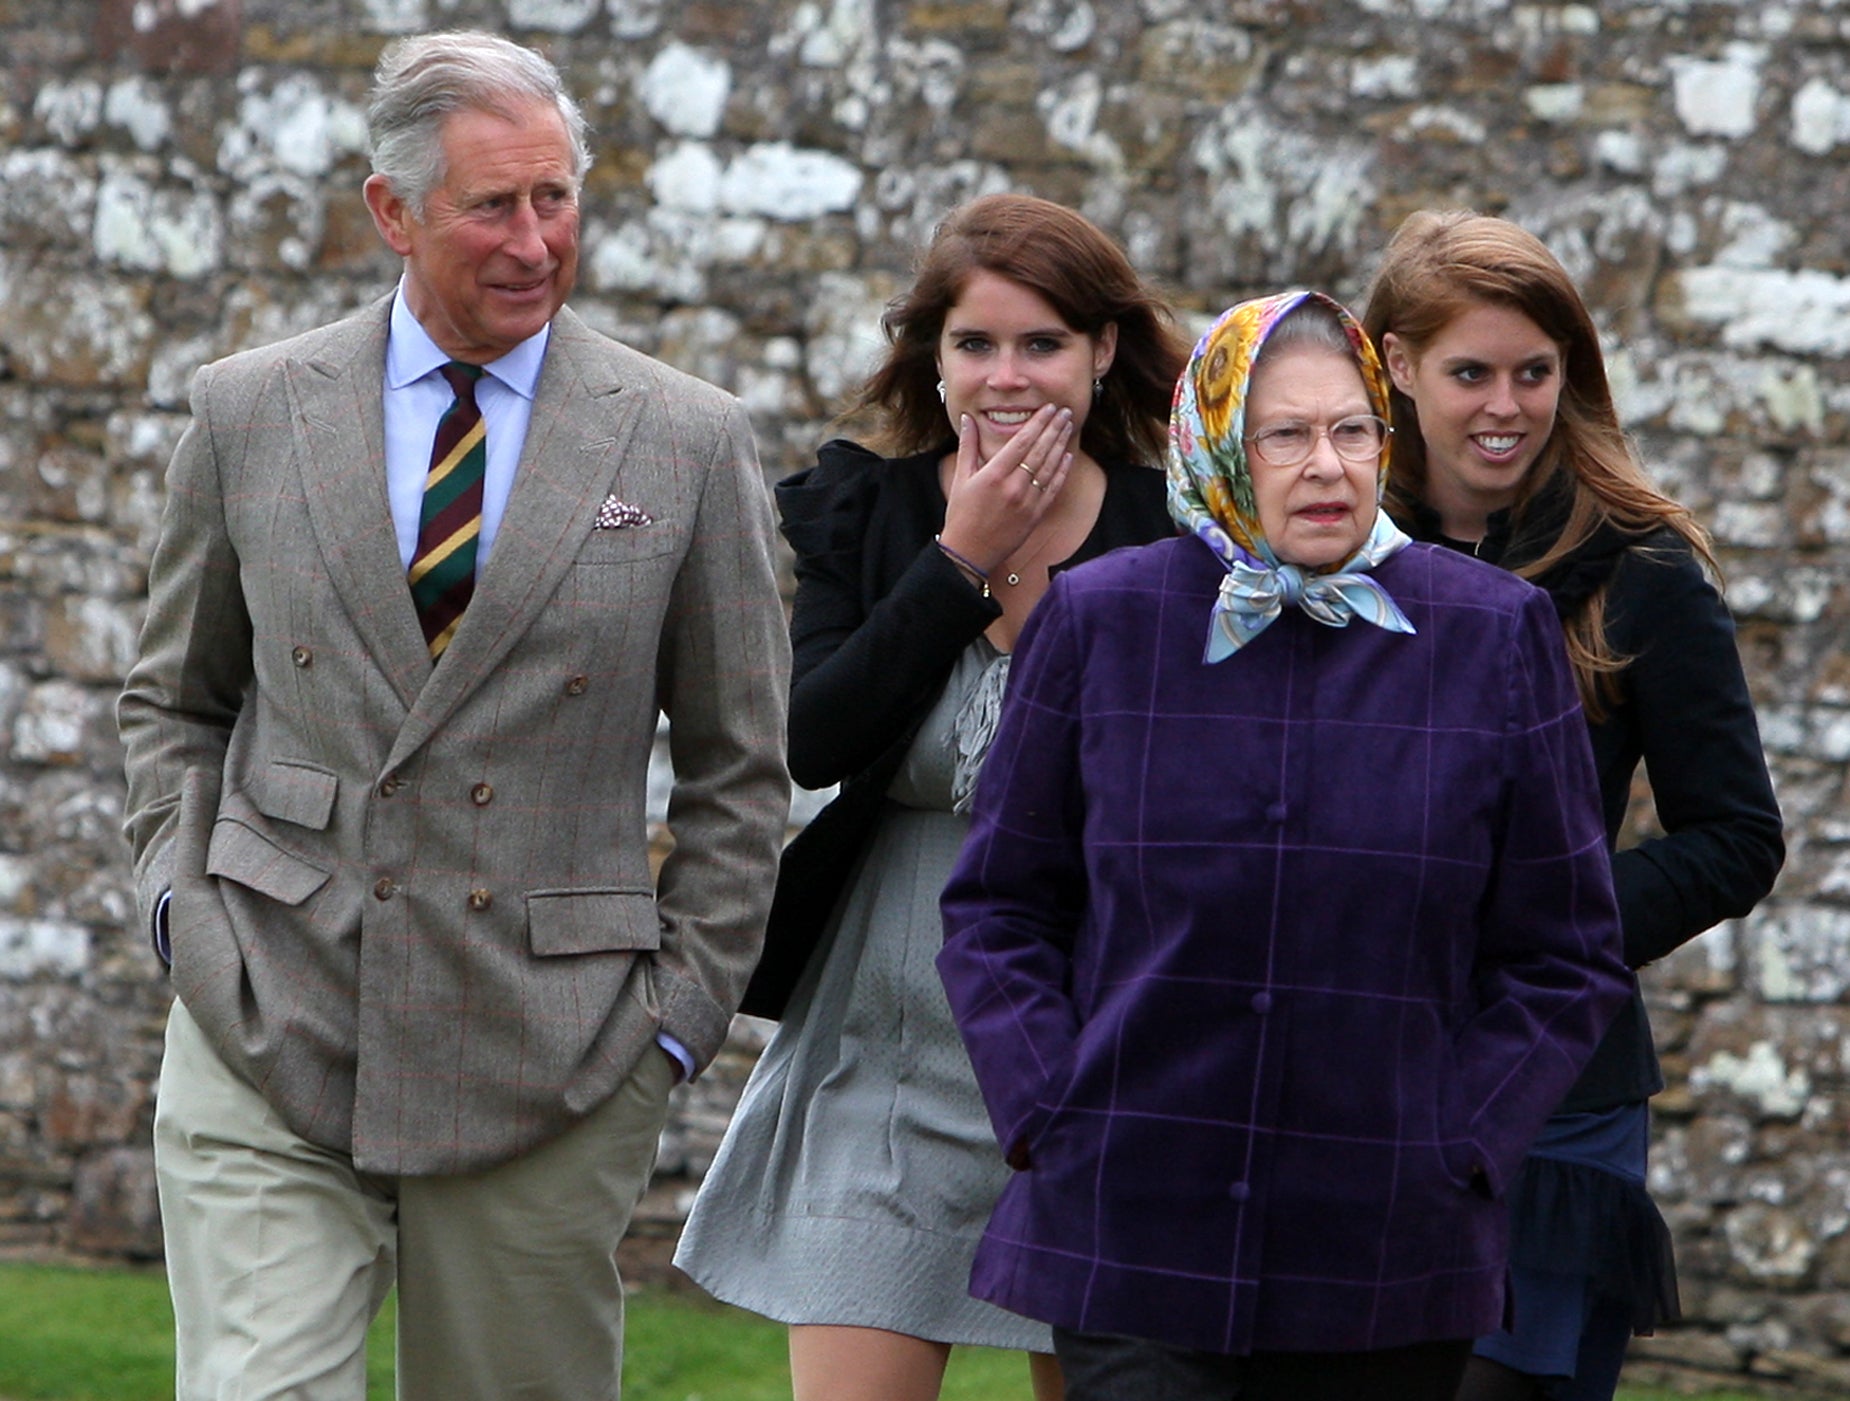 Queen Elizabeth II (R) accompanied by Prince Charles, Prince of Wales (L), Princess Eugenie, (C), and Princess Beatrice and the rest of the Royal family arrive at the Castle of Mey in 2010